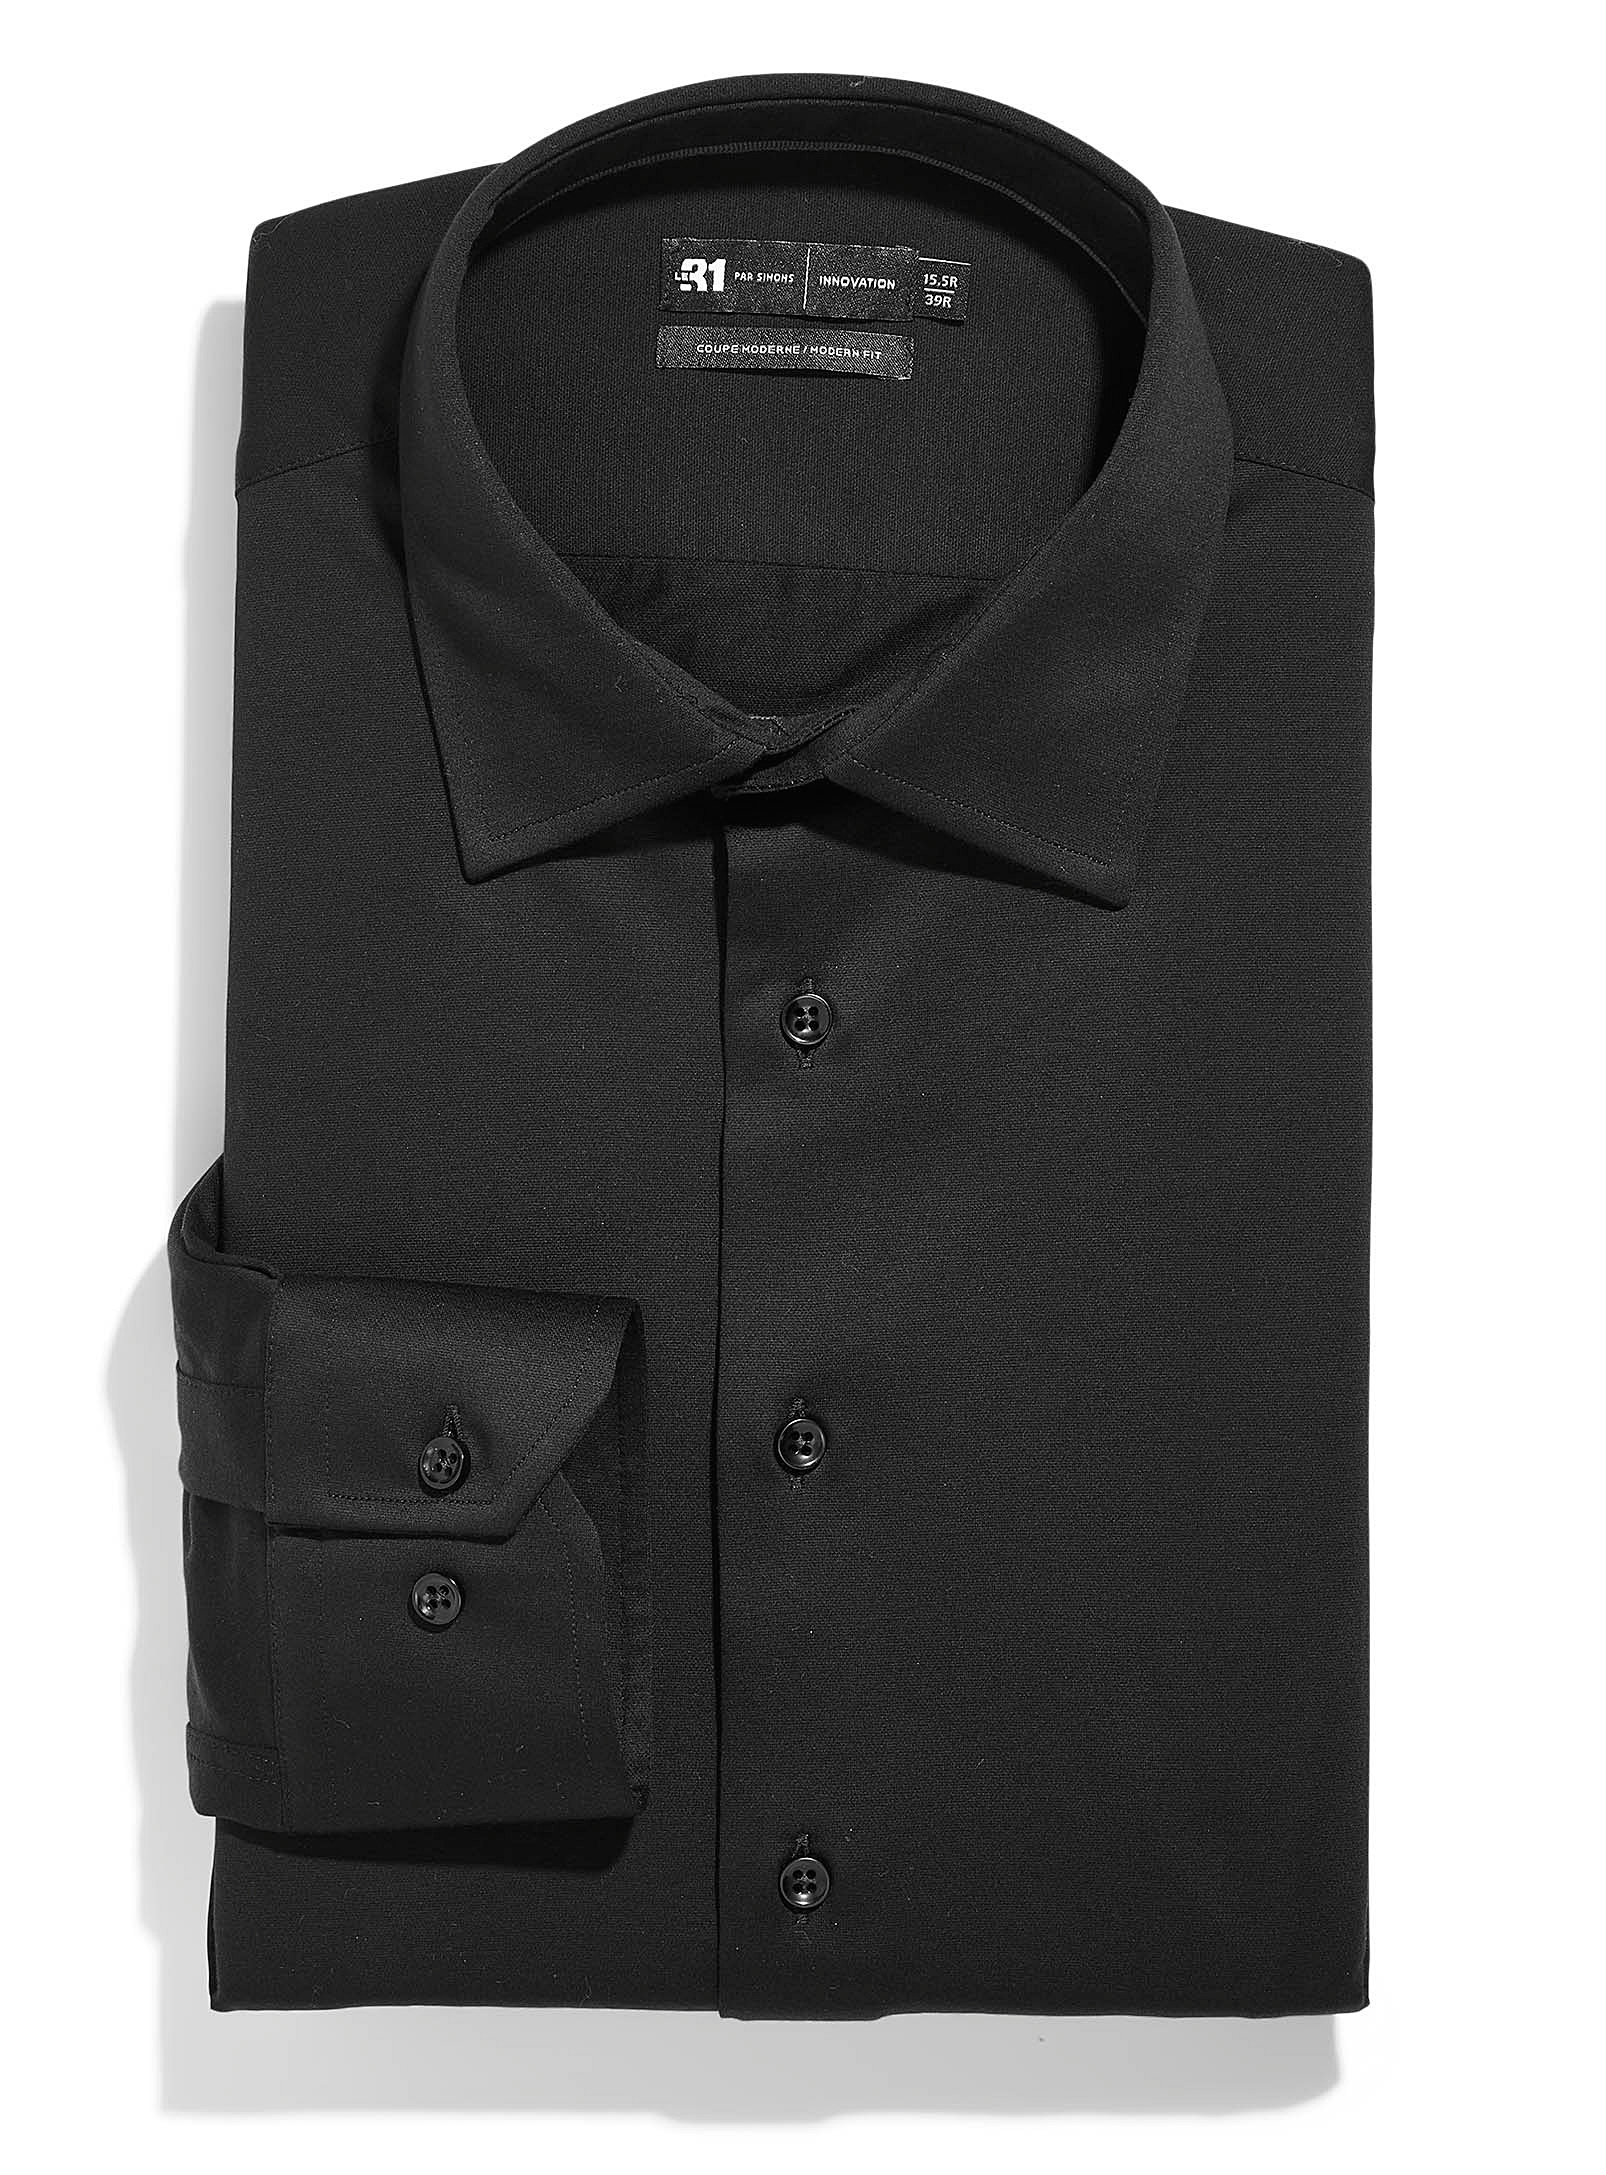 Le 31 Knit Shirt Modern Fit Innovation Collection In Black